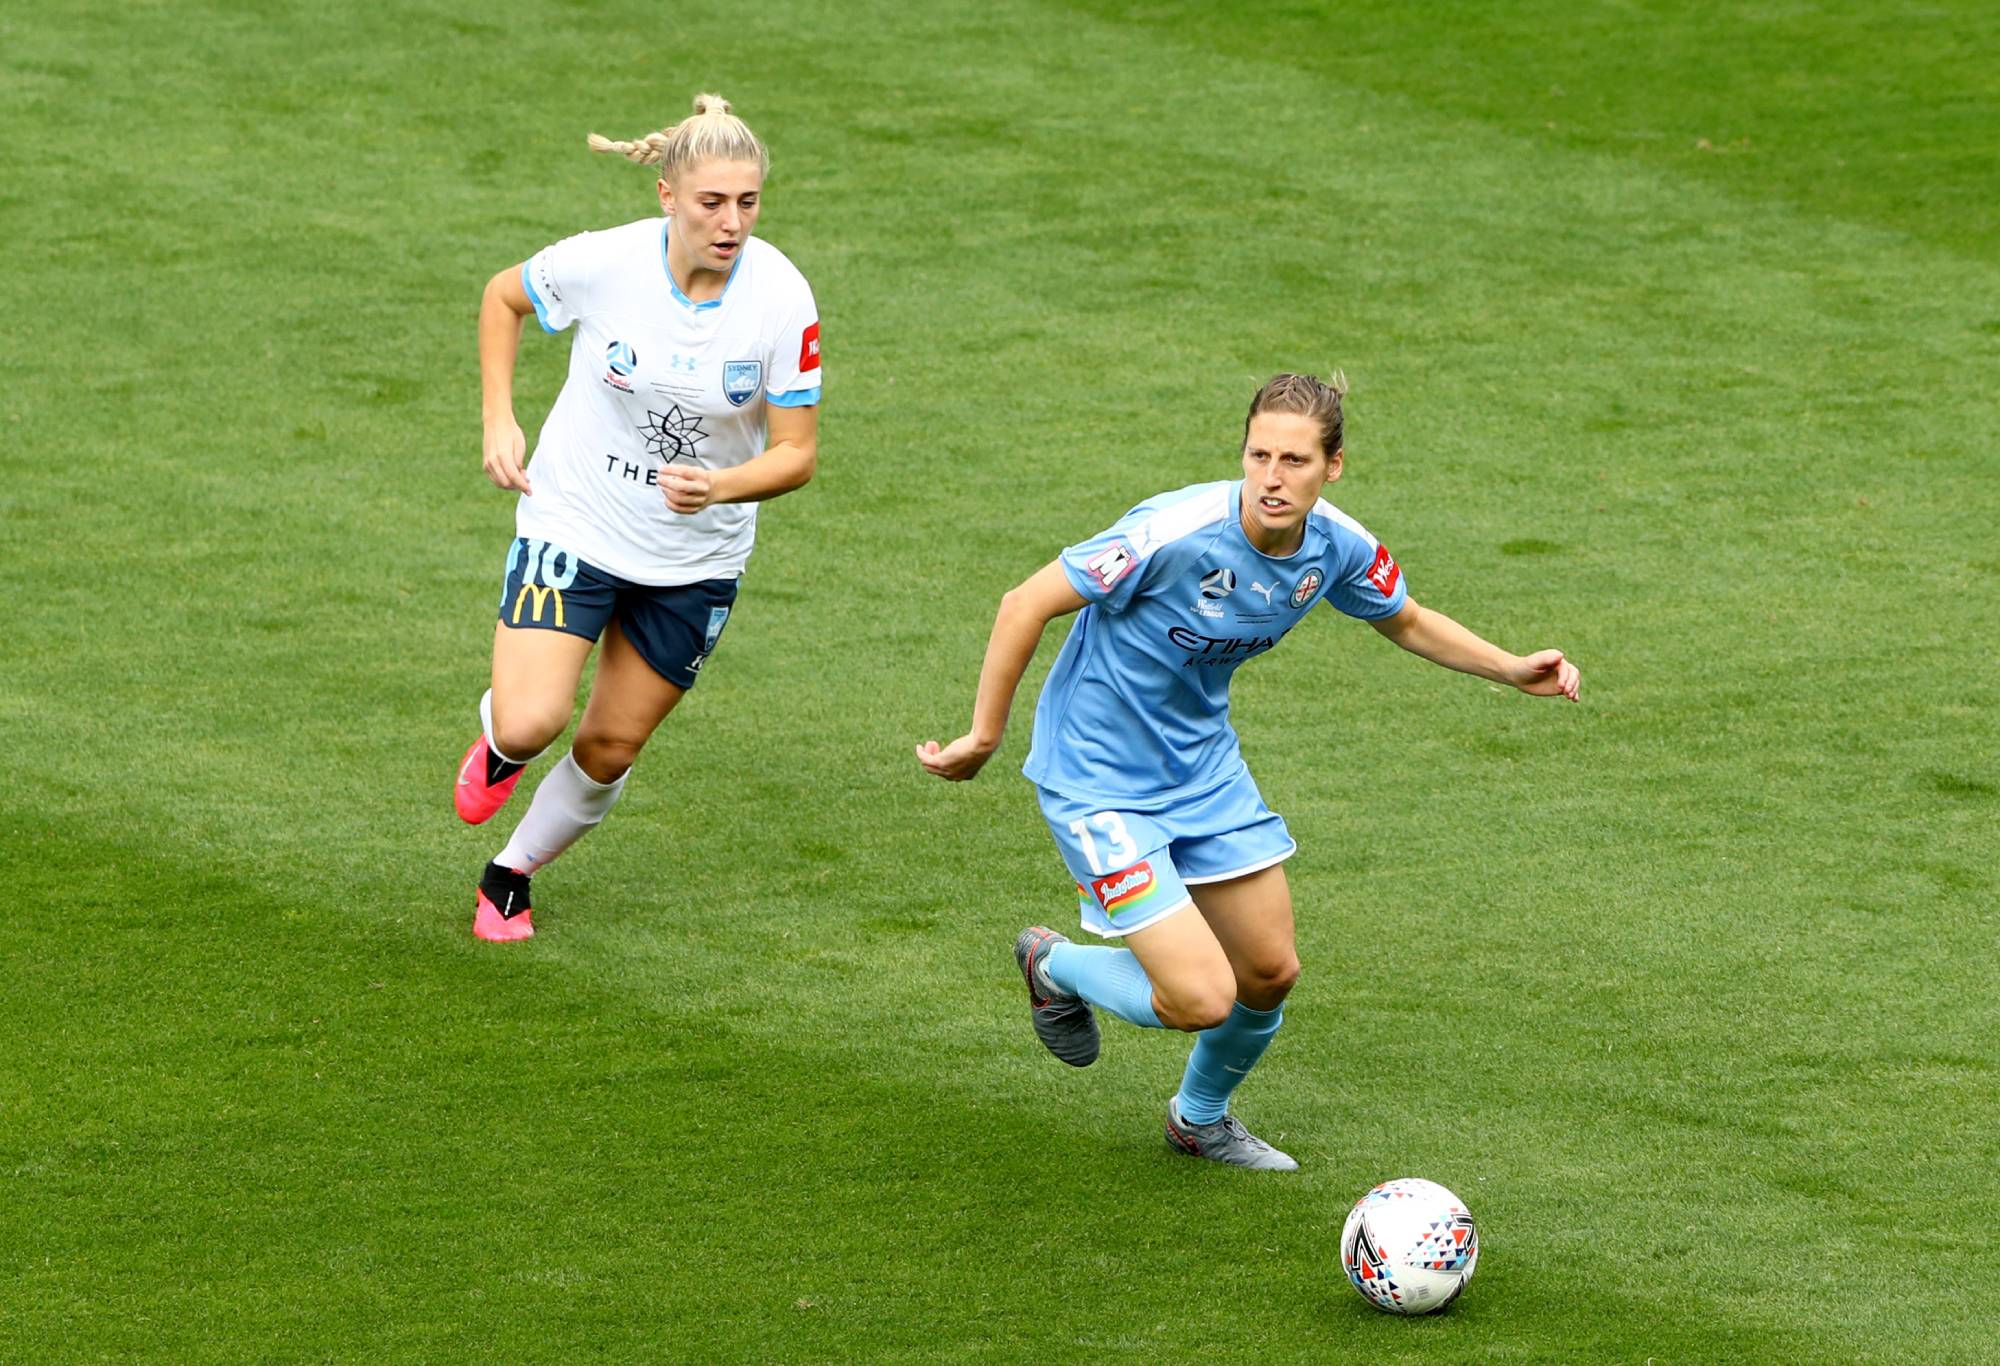 Rebekah Stott of Melbourne City makes a break away from Remy Siemsen of Sydney FC during the 2020 W-League Grand Final match between Melbourne City and Sydney FC at AAMI Park on March 21, 2020 in Melbourne, Australia. (Photo by Robert Cianflone/Getty Images)